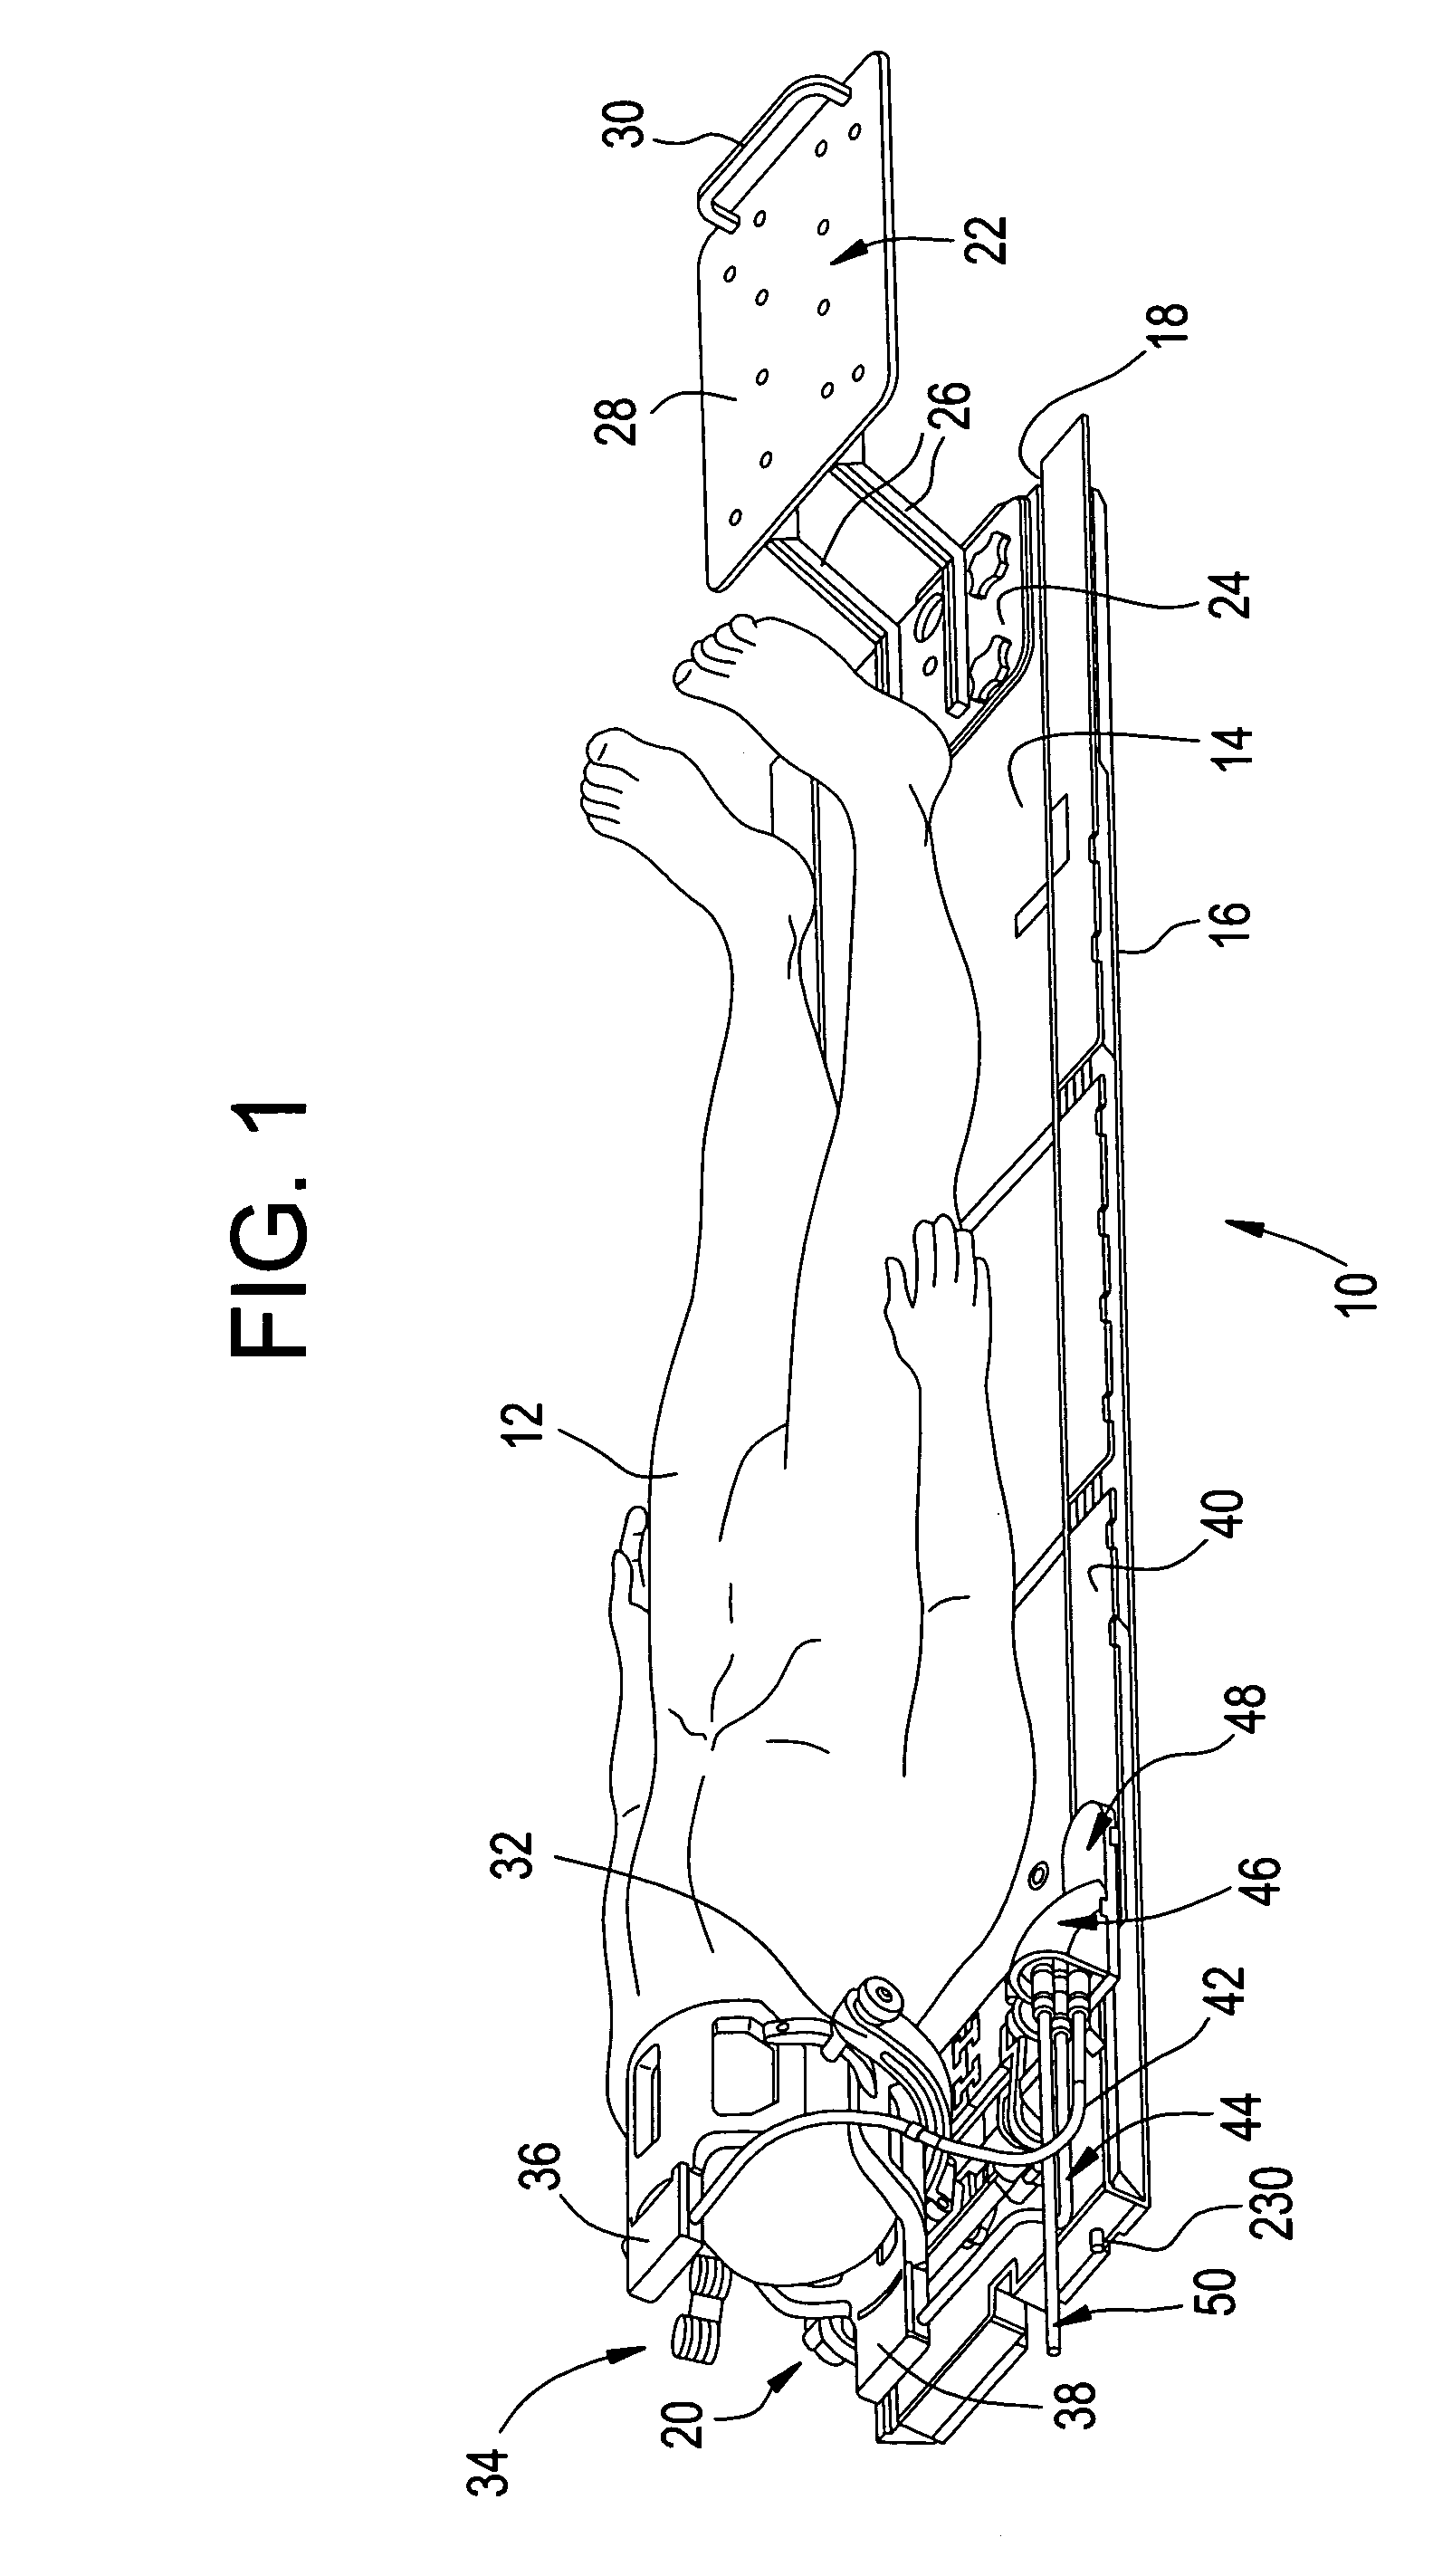 System, method and apparatus for surgical patient table